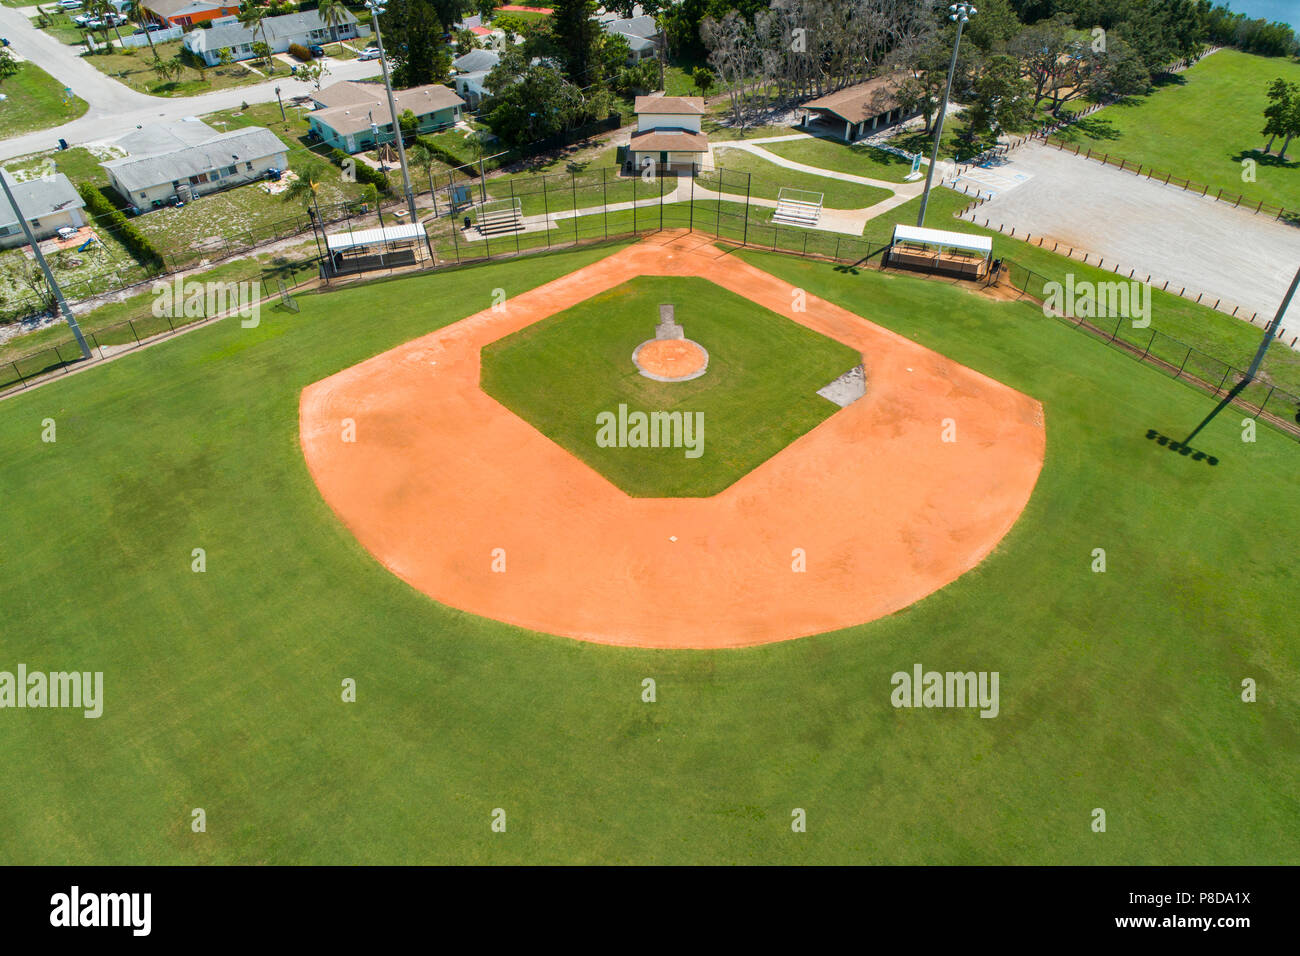 Aerial view of a baseball diamond field used for recreational sports Stock Photo